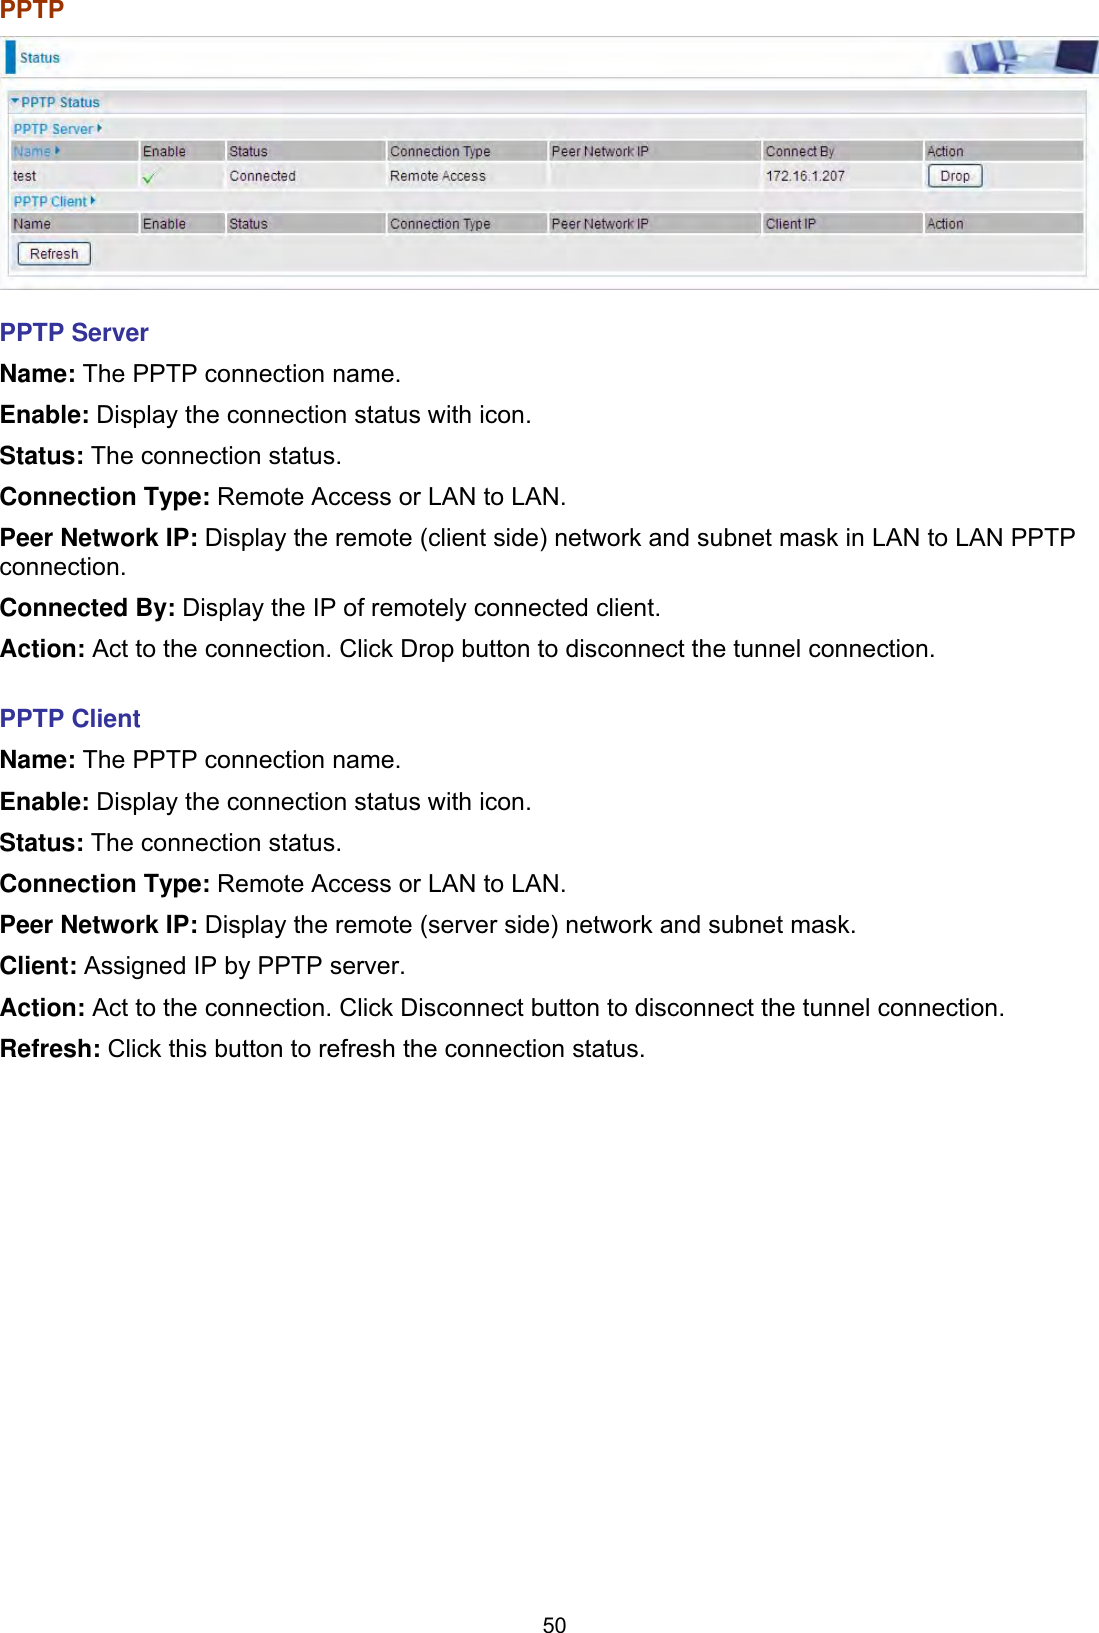 50PPTP  PPTP Server Name: The PPTP connection name. Enable: Display the connection status with icon. Status: The connection status. Connection Type: Remote Access or LAN to LAN. Peer Network IP: Display the remote (client side) network and subnet mask in LAN to LAN PPTP connection.Connected By: Display the IP of remotely connected client. Action: Act to the connection. Click Drop button to disconnect the tunnel connection. PPTP Client Name: The PPTP connection name. Enable: Display the connection status with icon. Status: The connection status. Connection Type: Remote Access or LAN to LAN. Peer Network IP: Display the remote (server side) network and subnet mask.Client: Assigned IP by PPTP server. Action: Act to the connection. Click Disconnect button to disconnect the tunnel connection. Refresh: Click this button to refresh the connection status.